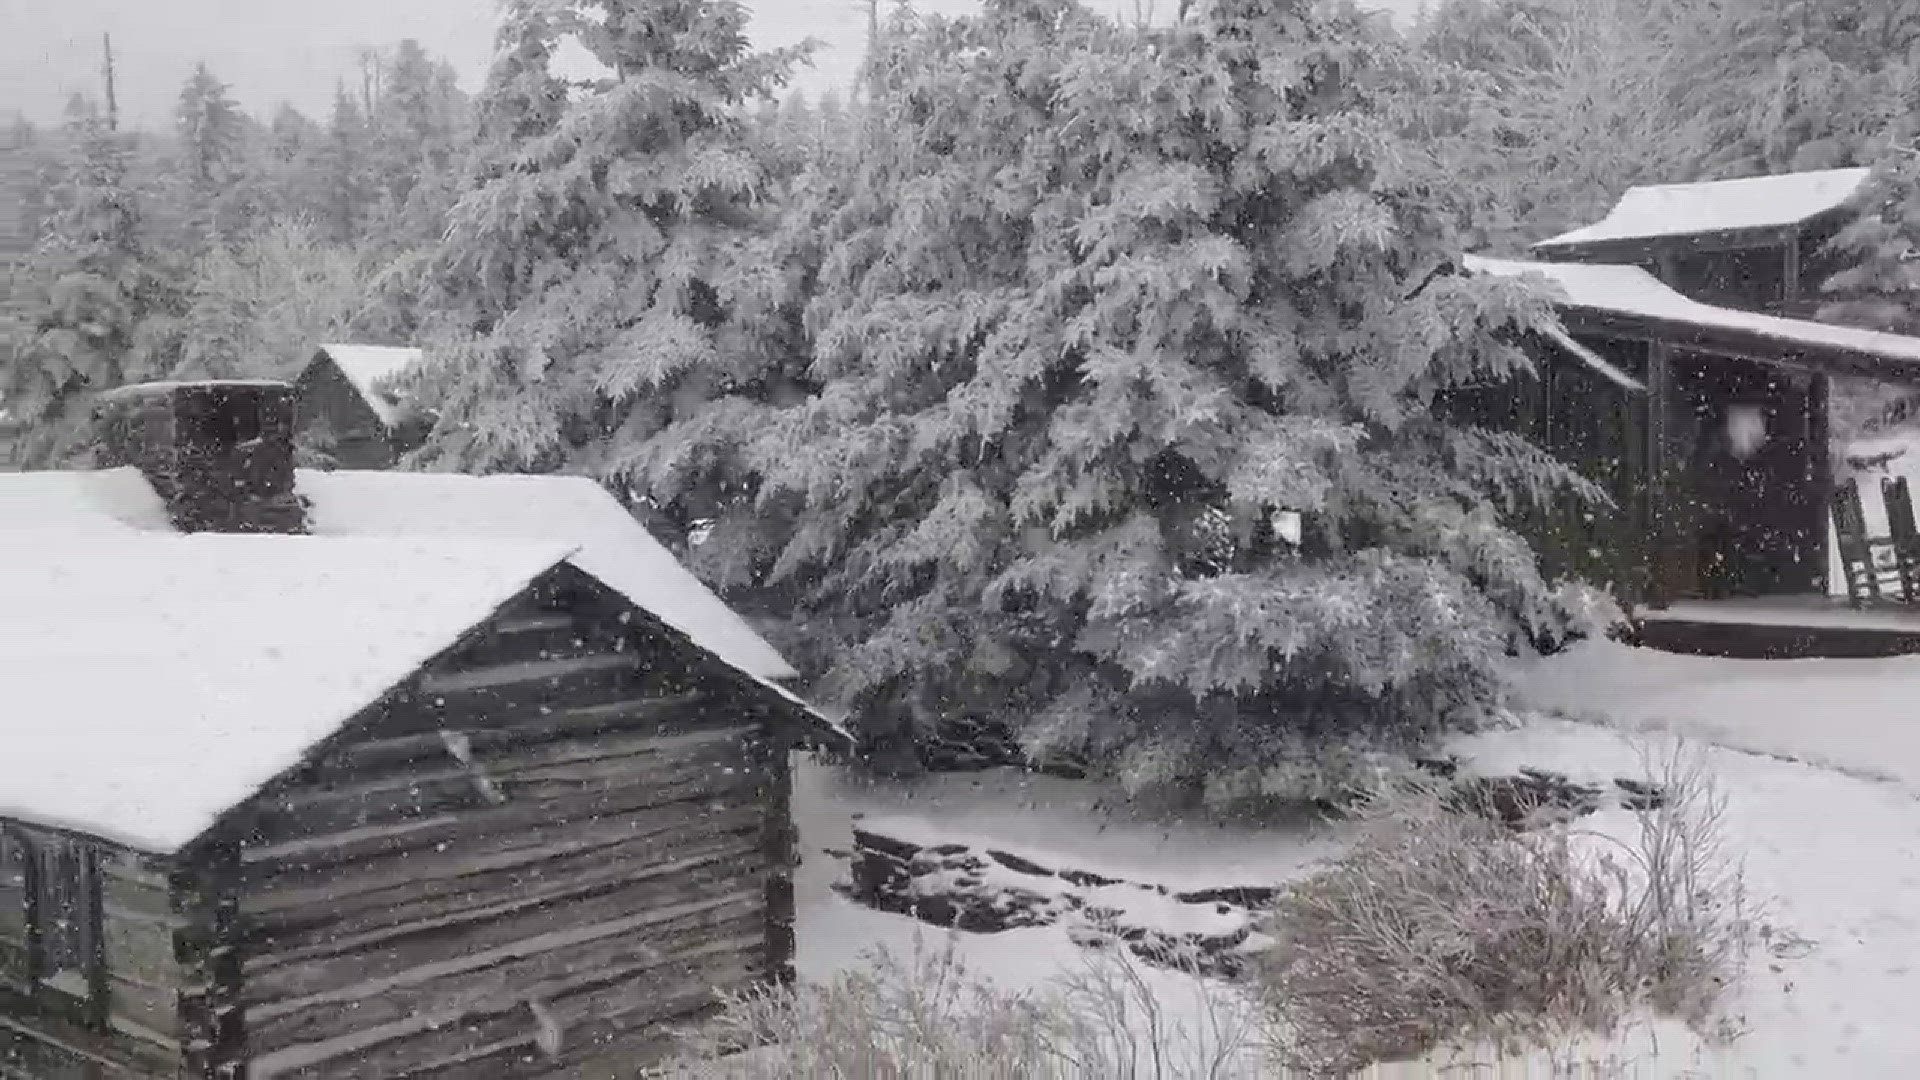 Mt. LeConte saw at least 6 inches of snow Saturday as frigid, wet weather moved through East Tennessee. (Video courtesy the LeConte Lodge and the Great Smoky Mountains National Park)